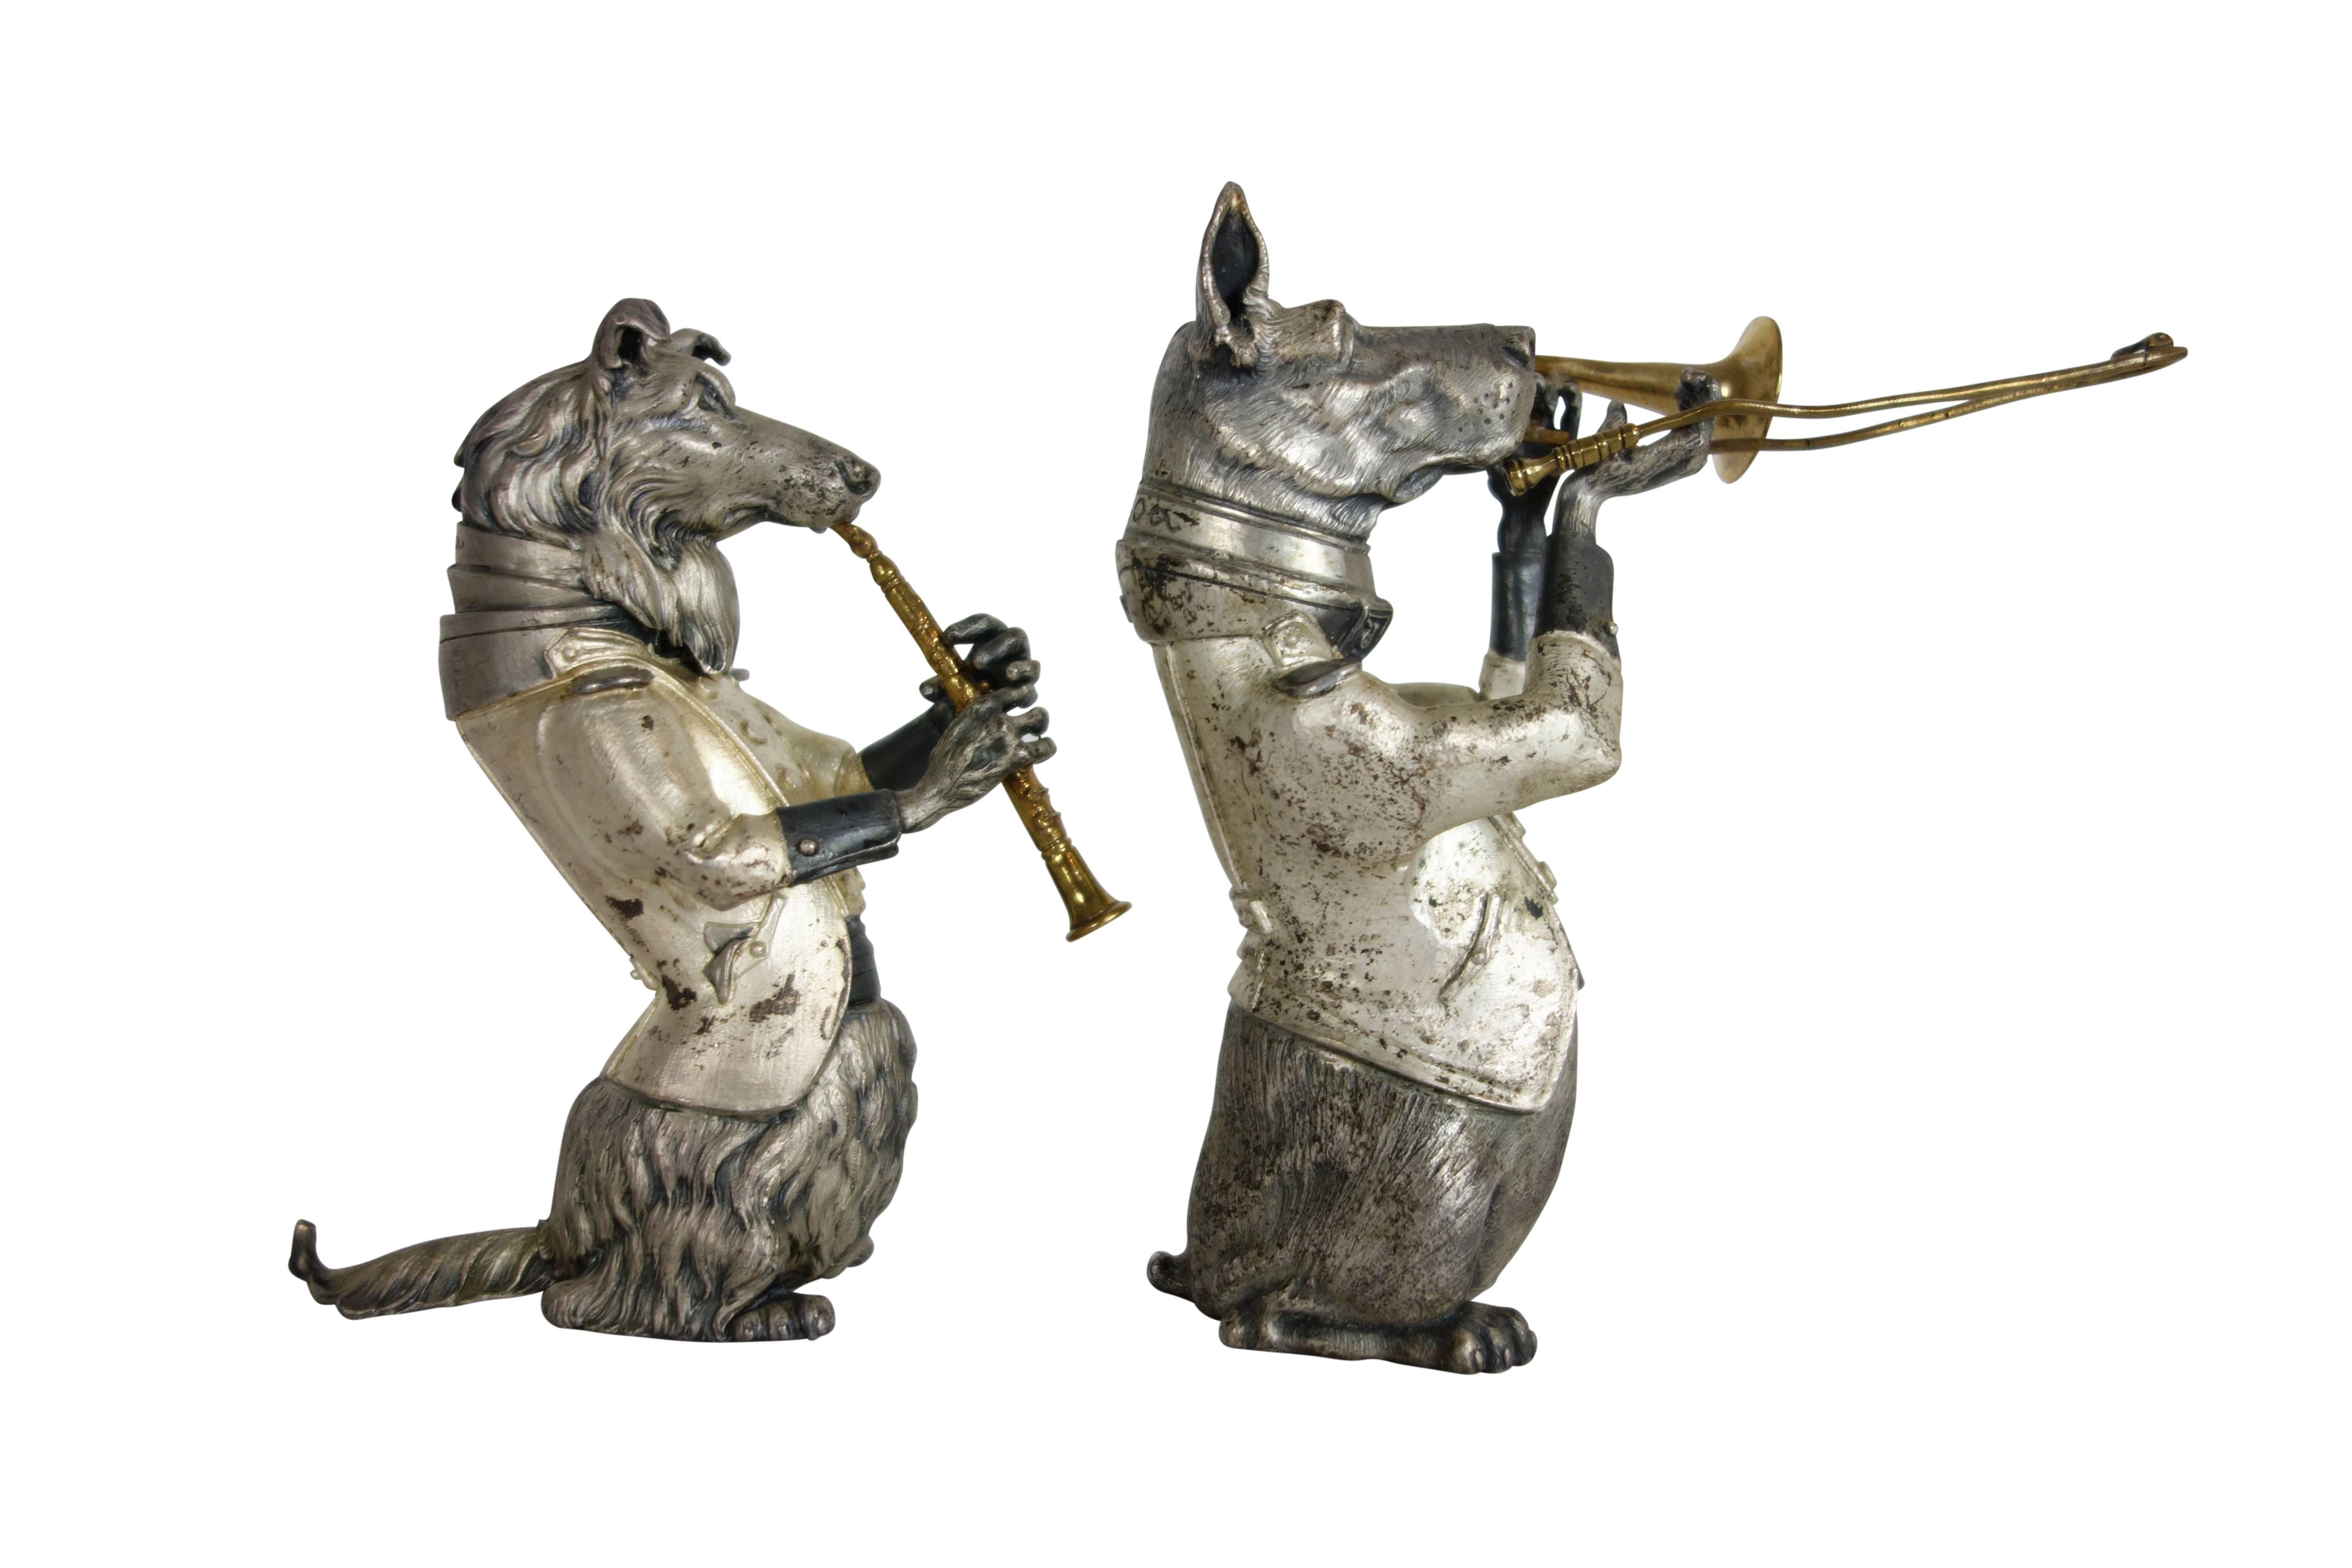 This is a fantastic pair of instrument playing dogs made of pewter, nickel, and brass. Their names are written on each of their collars, "Dogo" and "Collie." The taller dog playing the trombone is named "Dogo" and